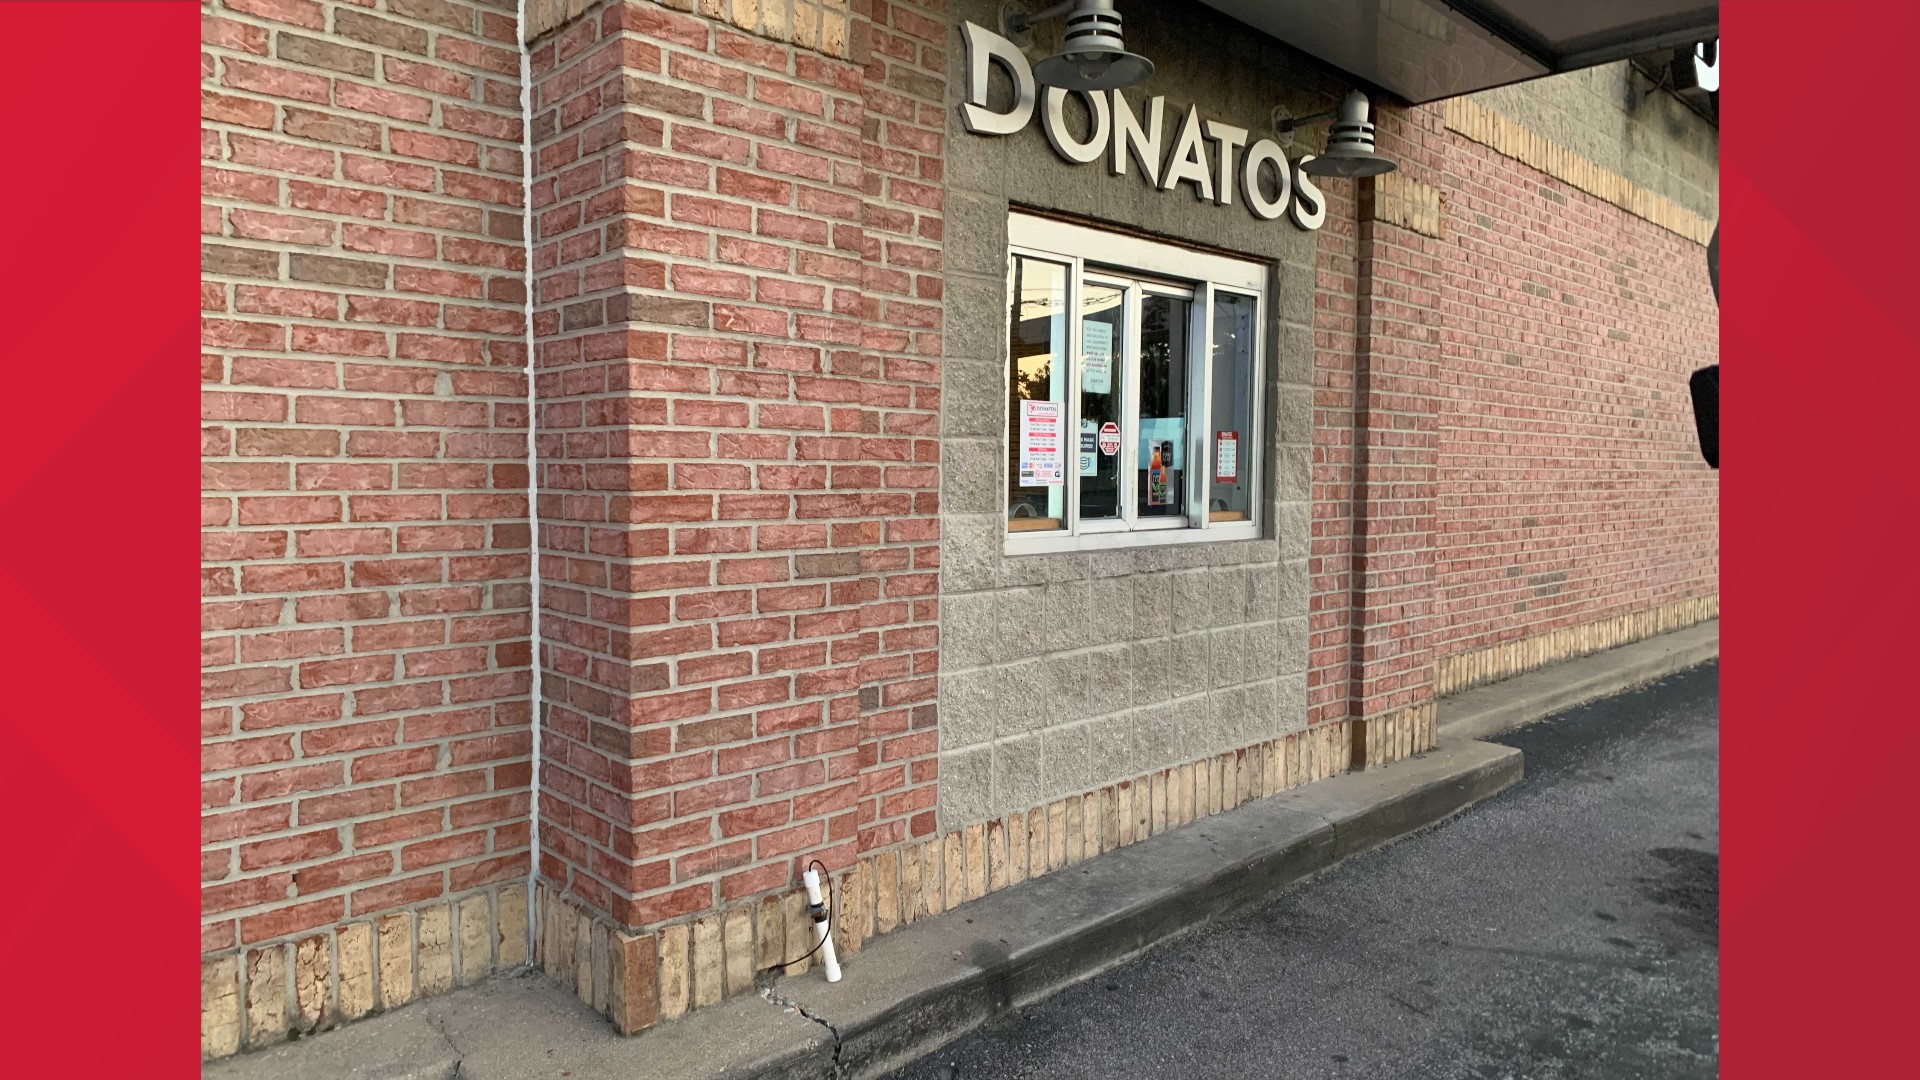 IMPD confirmed the "suspicious package" was a device found outside of the Donato's drive-thru window. There is no threat to the public.